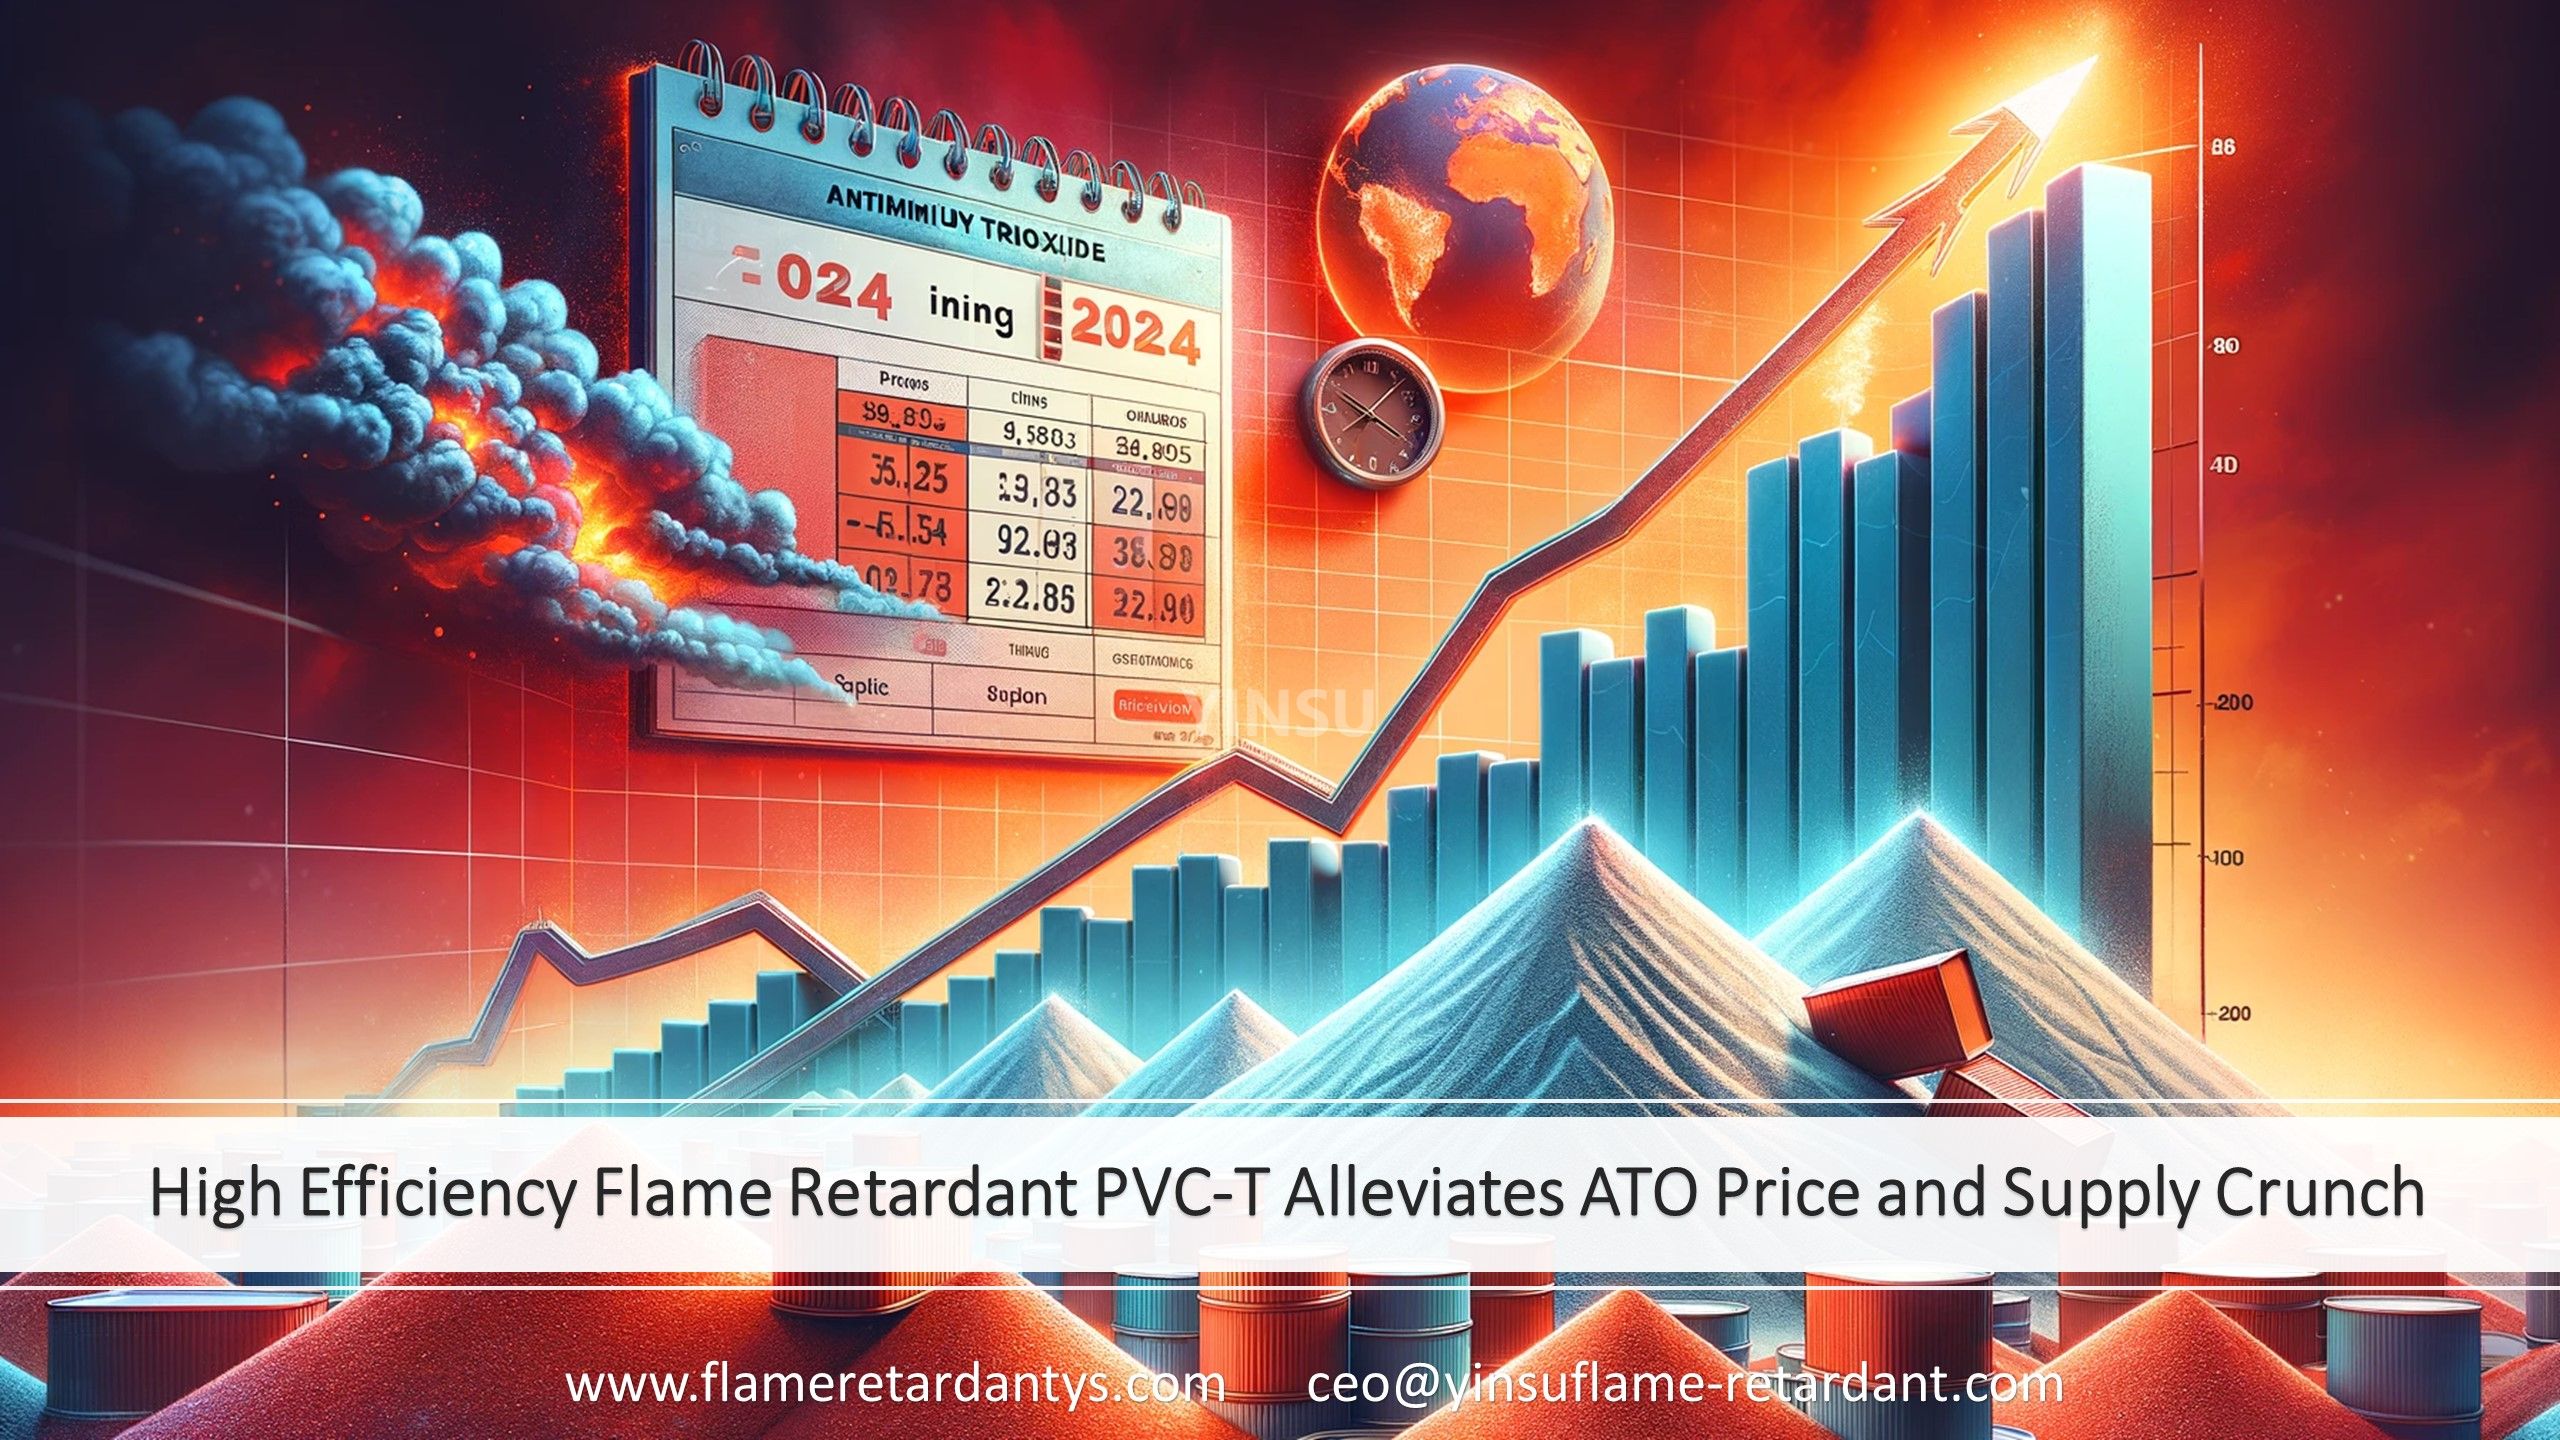 Newly Developed Highly Efficient Flame Retardant PVC-T to Cope with the High Price and Tight Supply of ATO